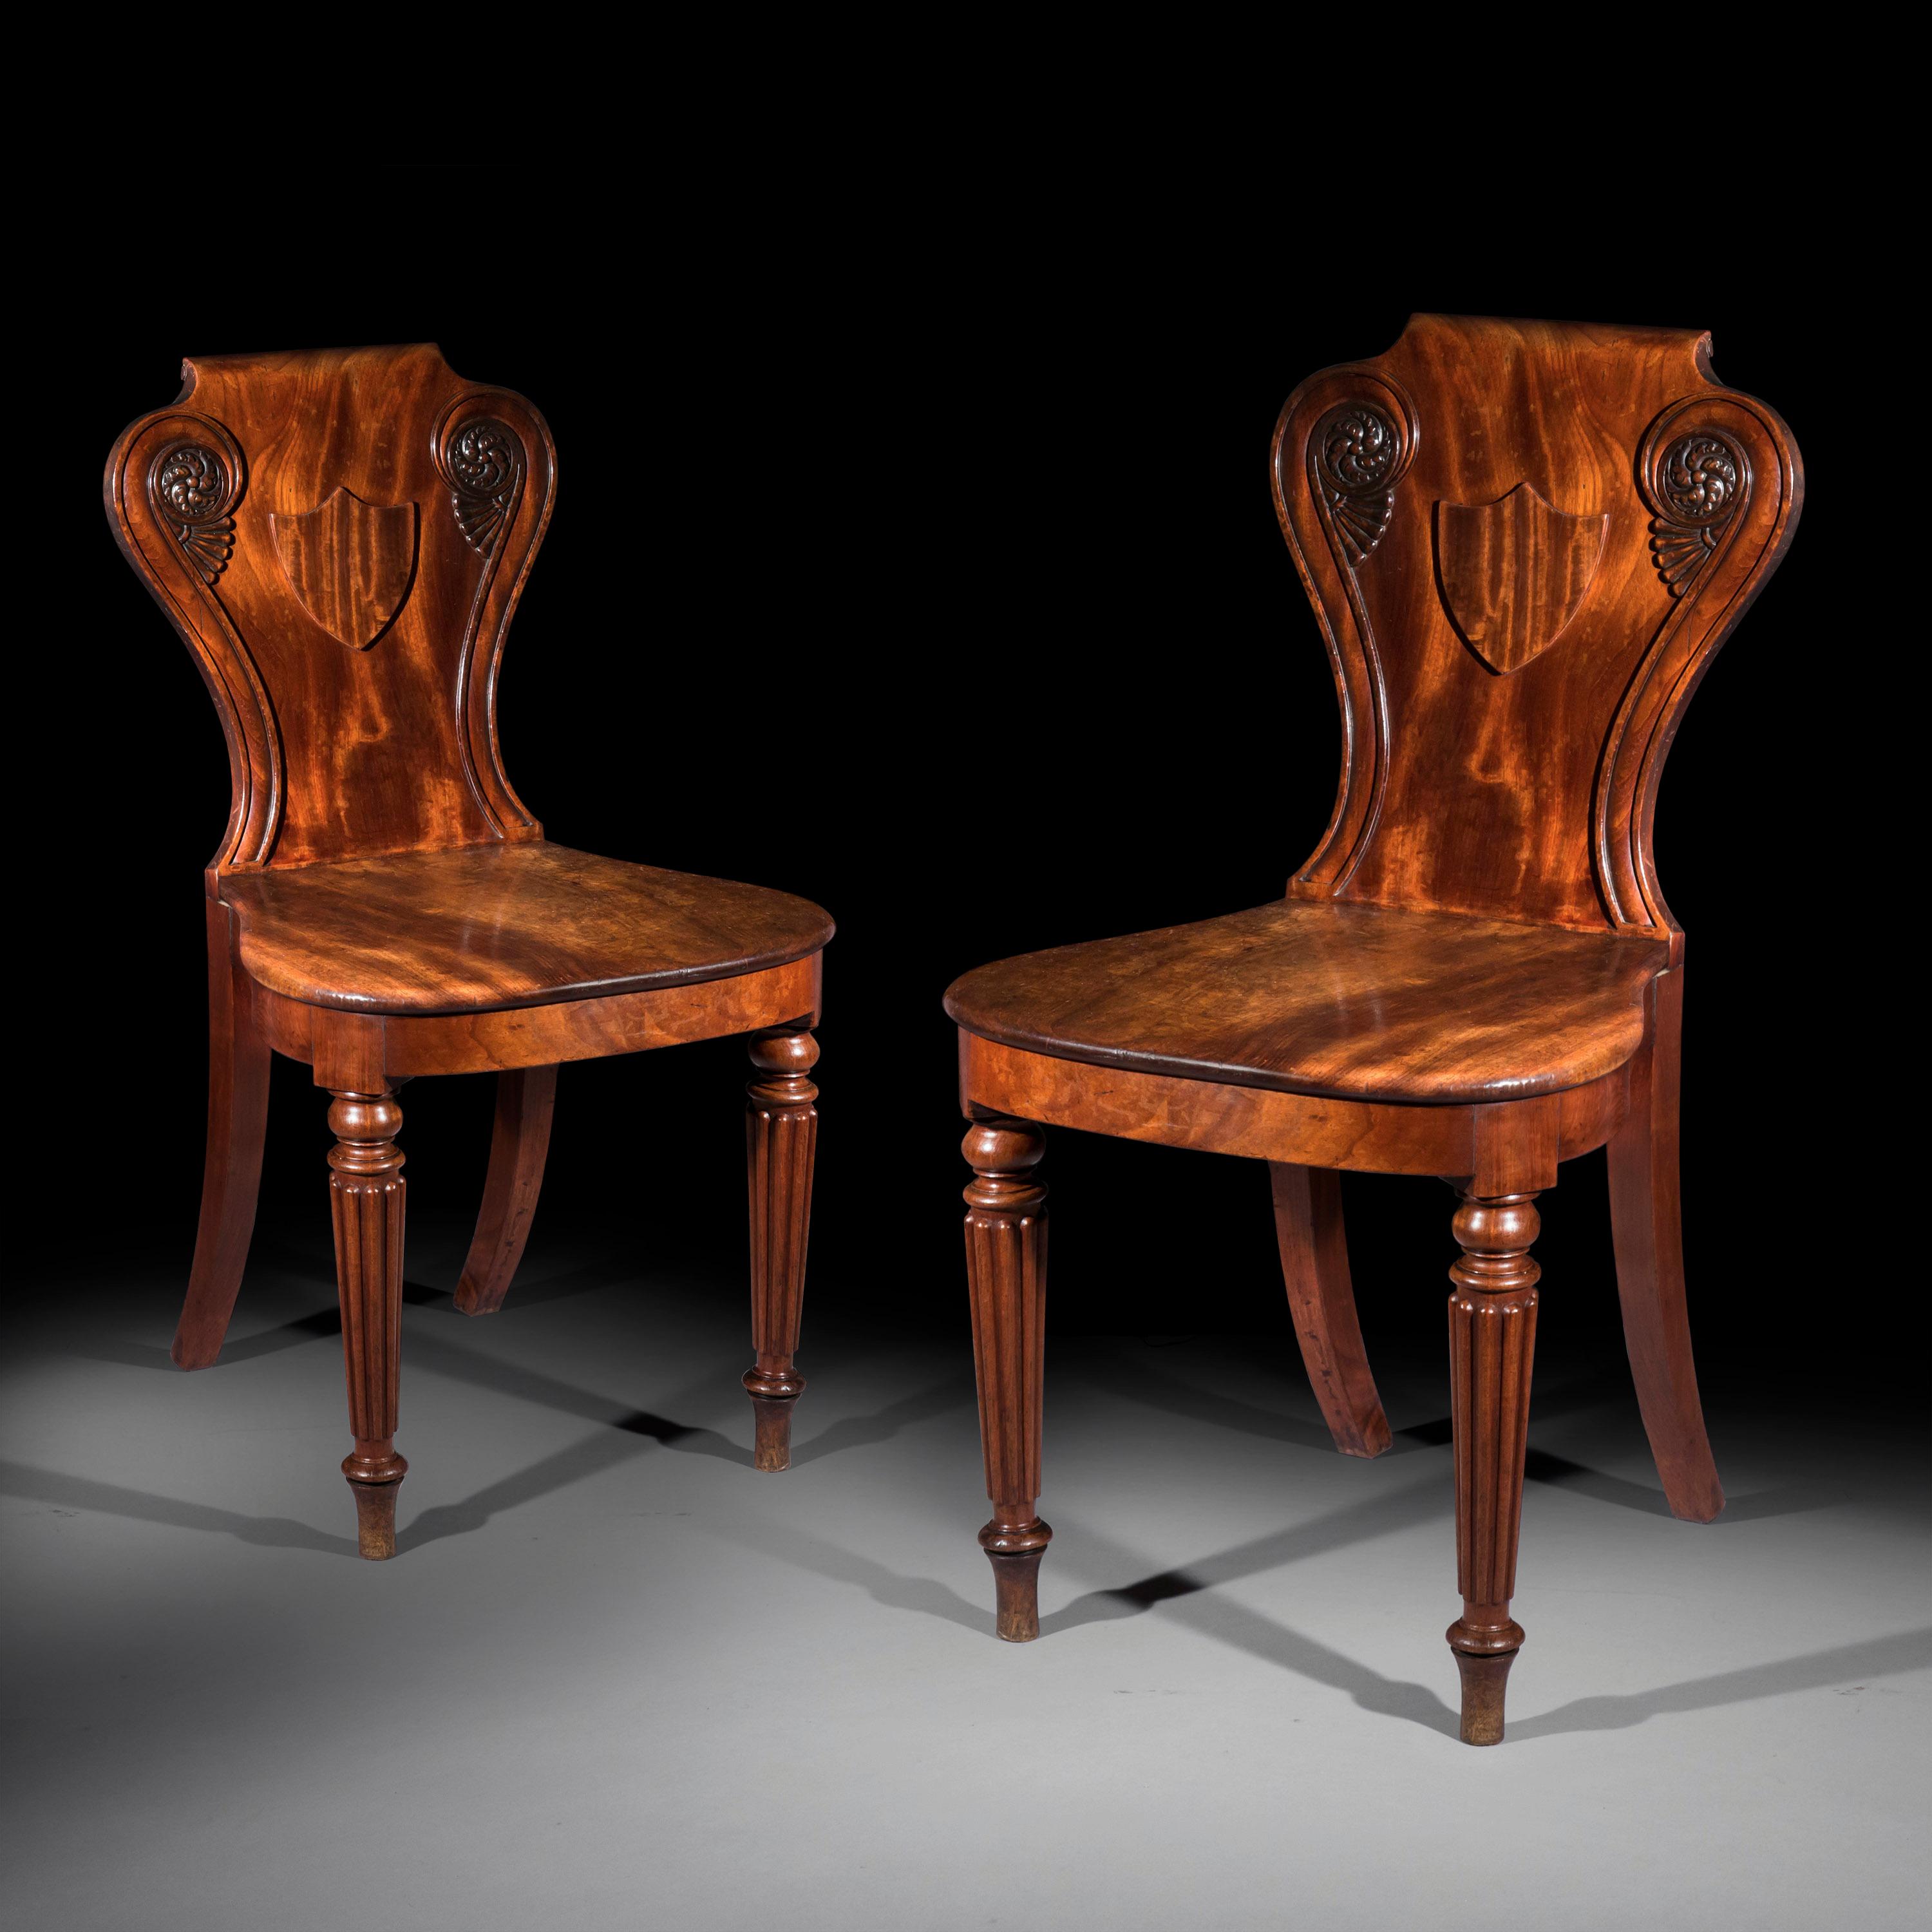 A very fine and elegant pair of hall chairs of the Regency period, almost certainly by Gillows of Lancaster and London,
England, circa 1815.

Why we like them
These are superb quality, wonderfully stylish hall chairs, made of superbly figured